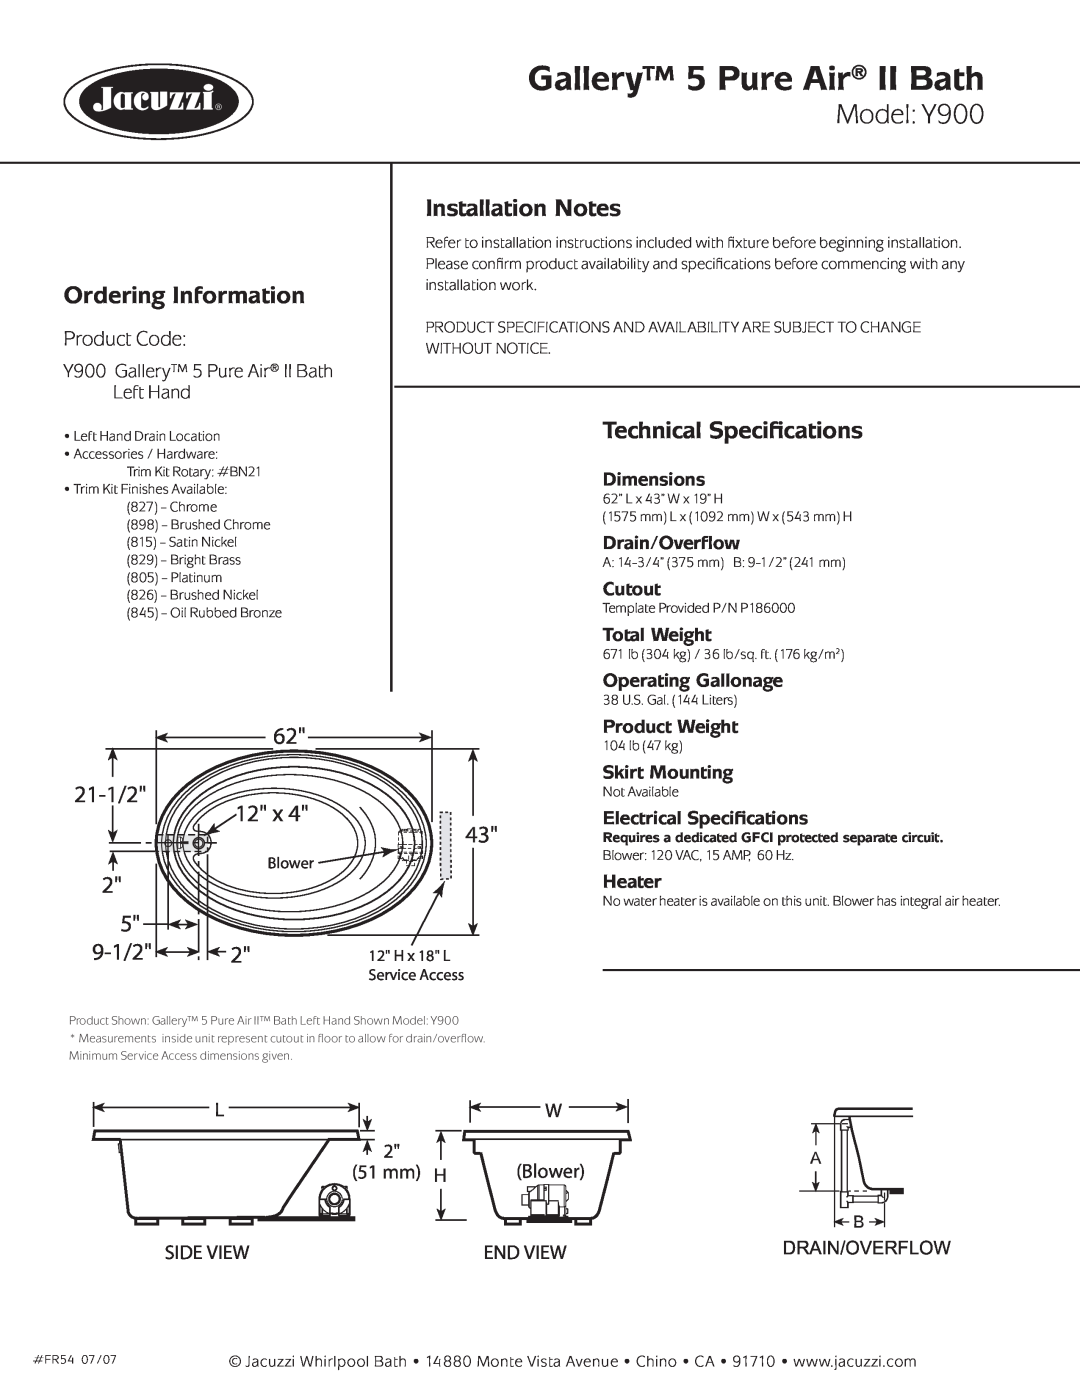 Jacuzzi Gallery 5 Pure Air II Bath, Model Y900, Ordering Information, Installation Notes, Technical Speciﬁcations 